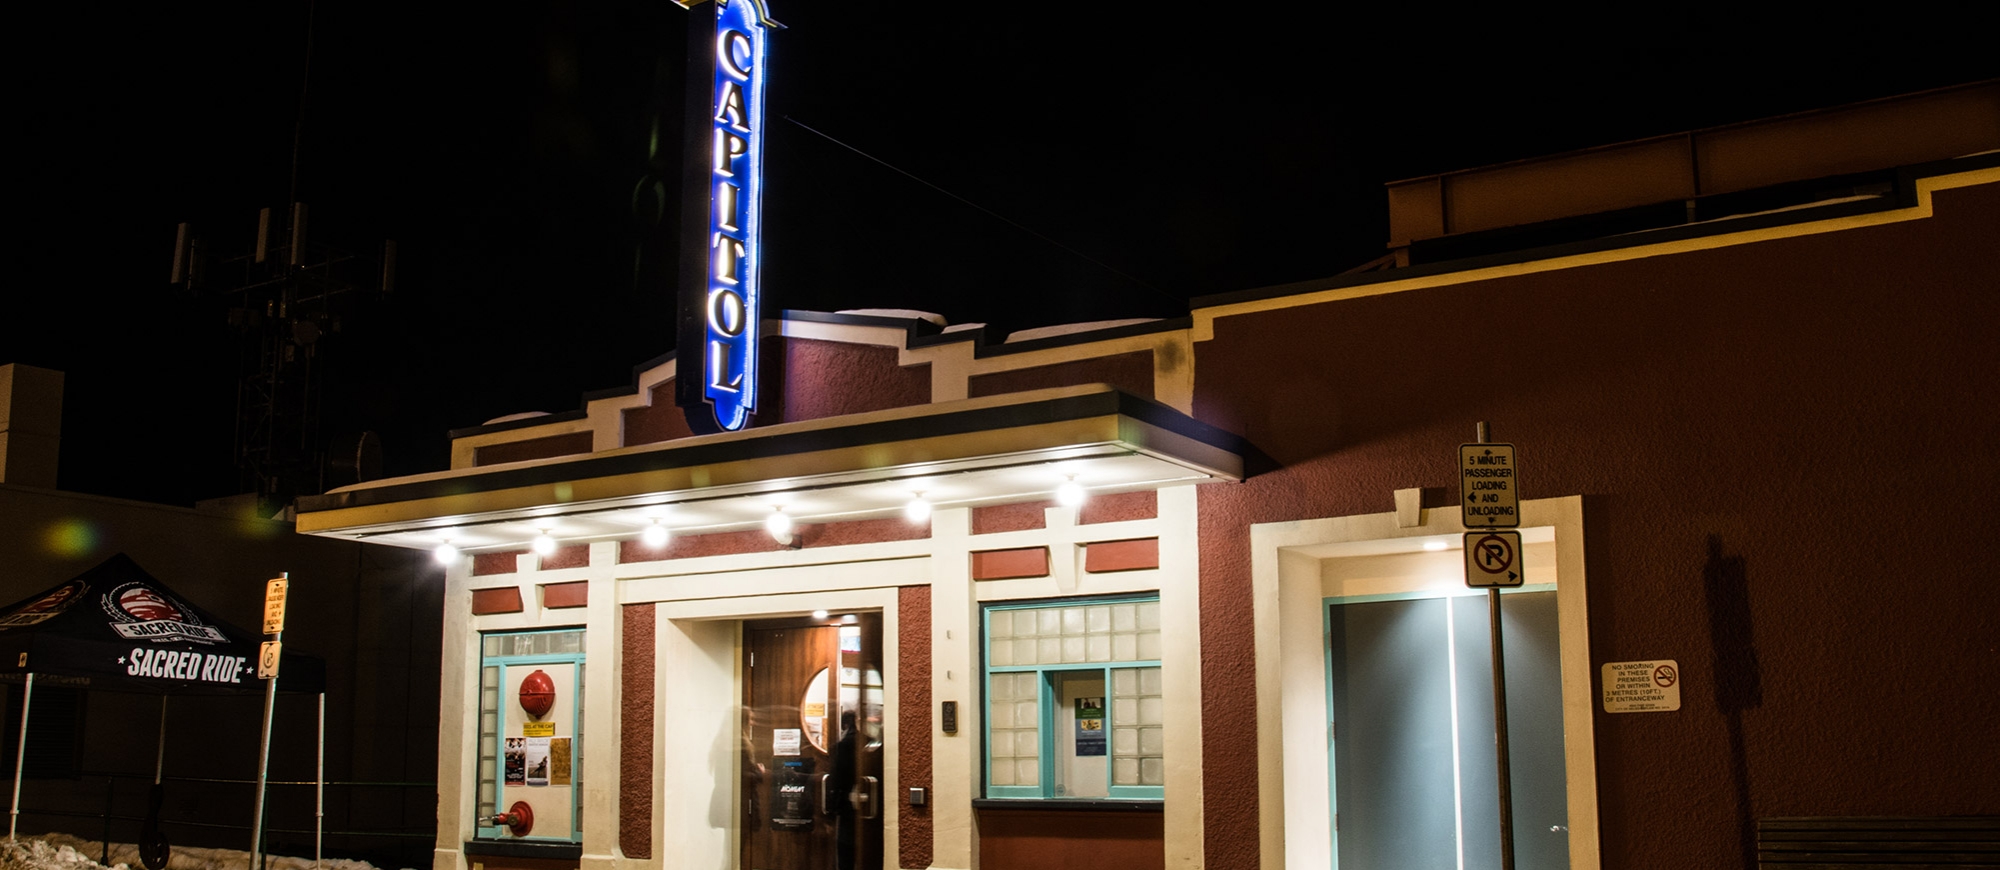 Capitol Theatre lit up at night in Nelson, BC